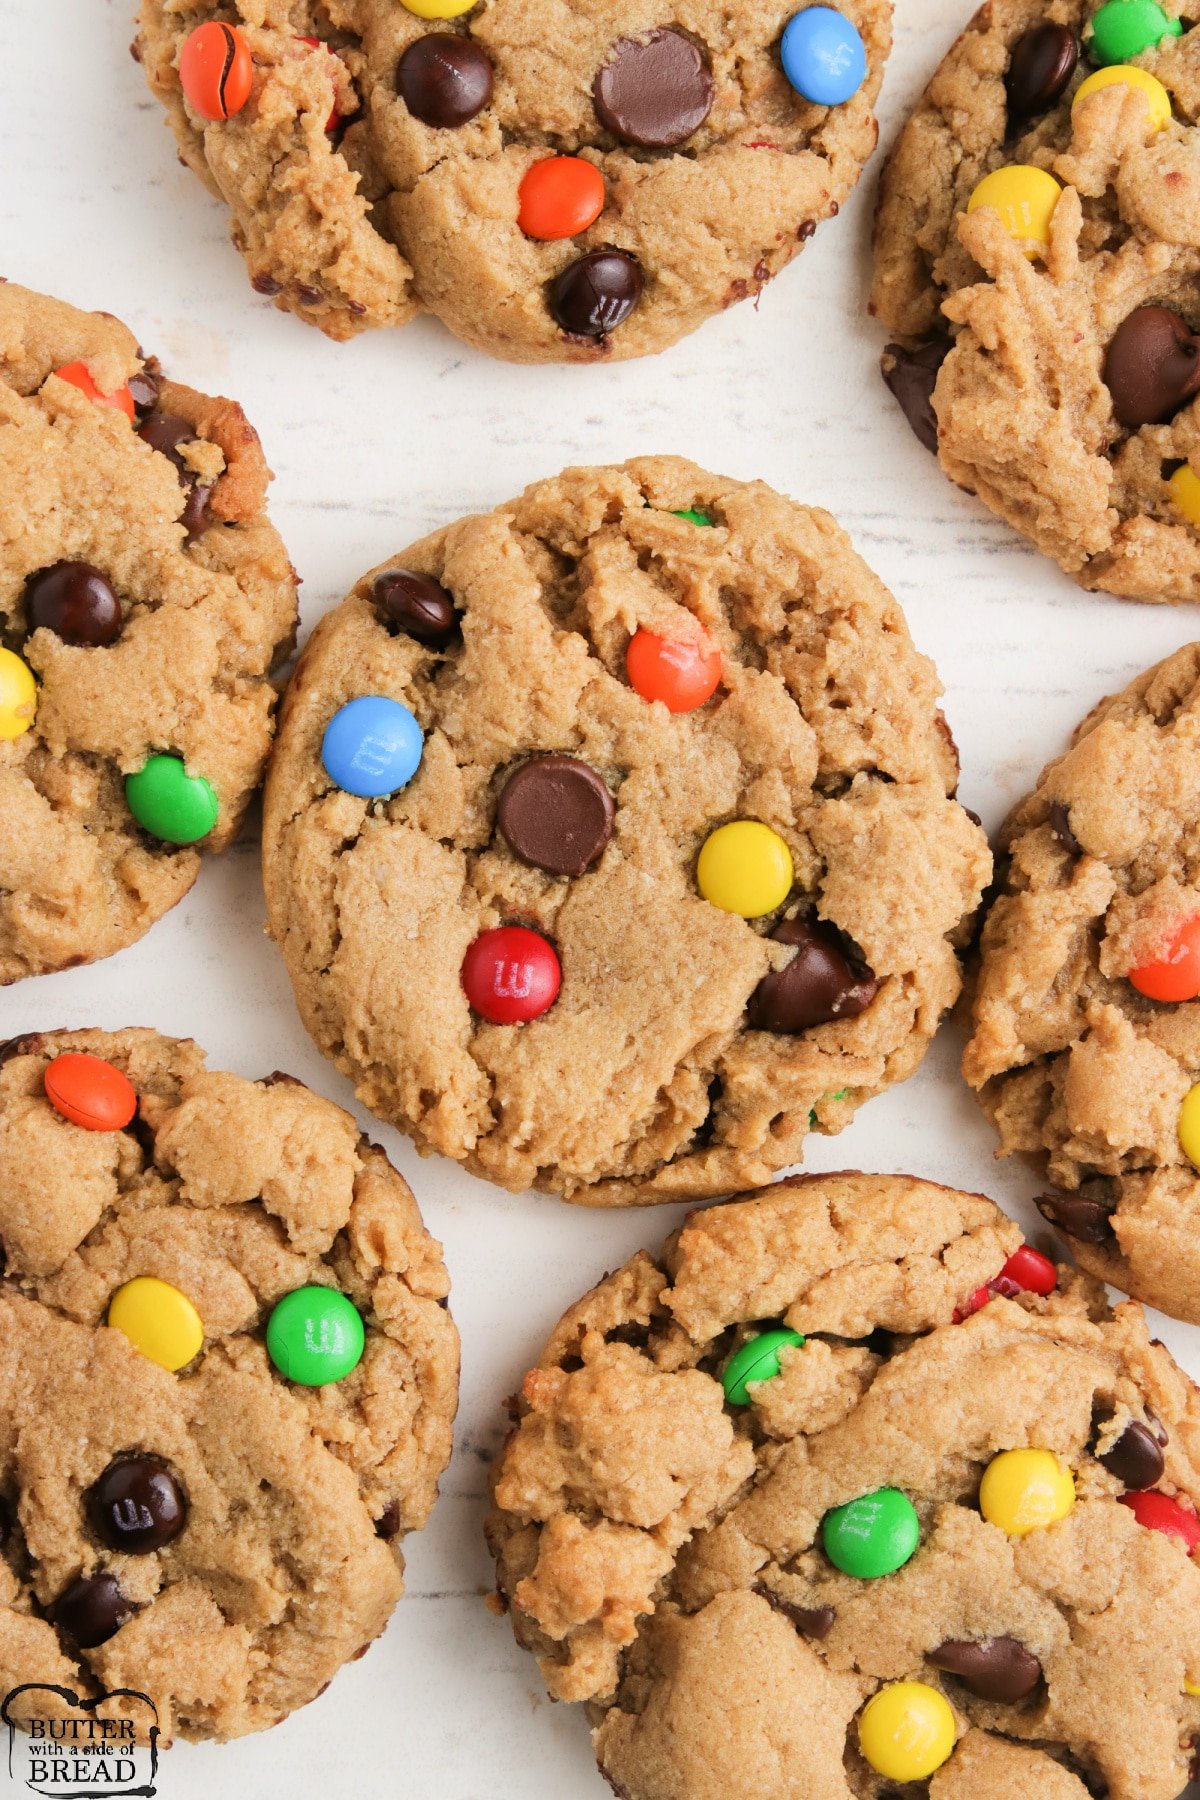 Monster Cookies are chewy, delicious and packed with oats, peanut butter and M&Ms! Naturally gluten free cookies that everyone loves!